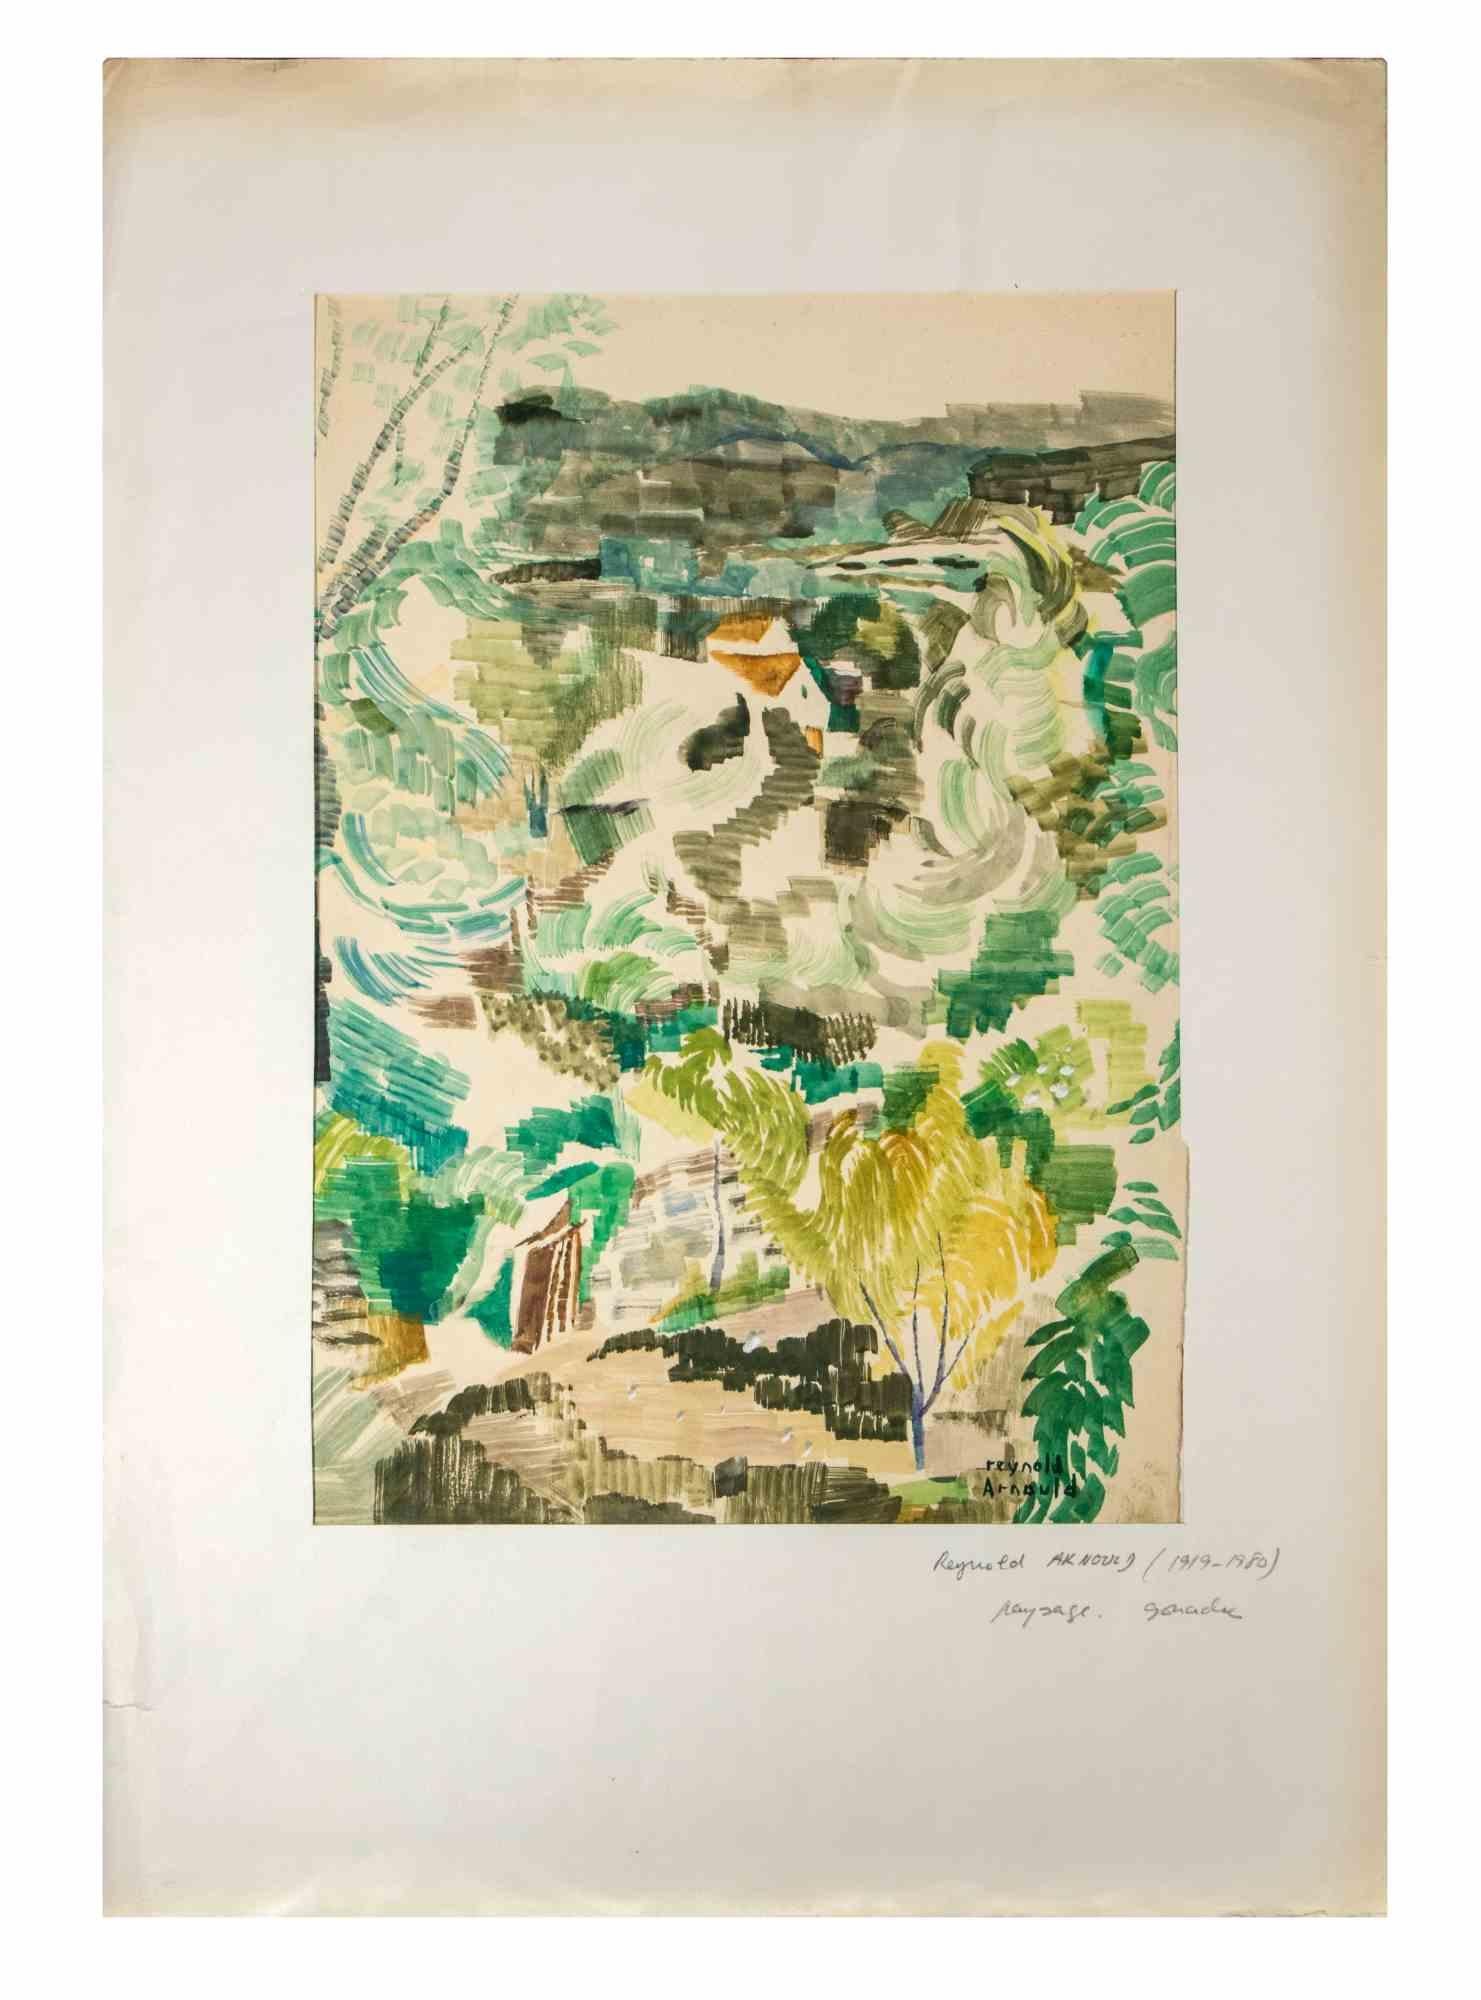 Landscape is a Gouache on paper realized by Reynold Arnould  (Le Havre 1919 - Parigi 1980).

Good condition, included a white cardboard passpartout (54x37.5 cm).

Hand-signed by the artist on the lower right corner.

Reynold Arnould was born in Le